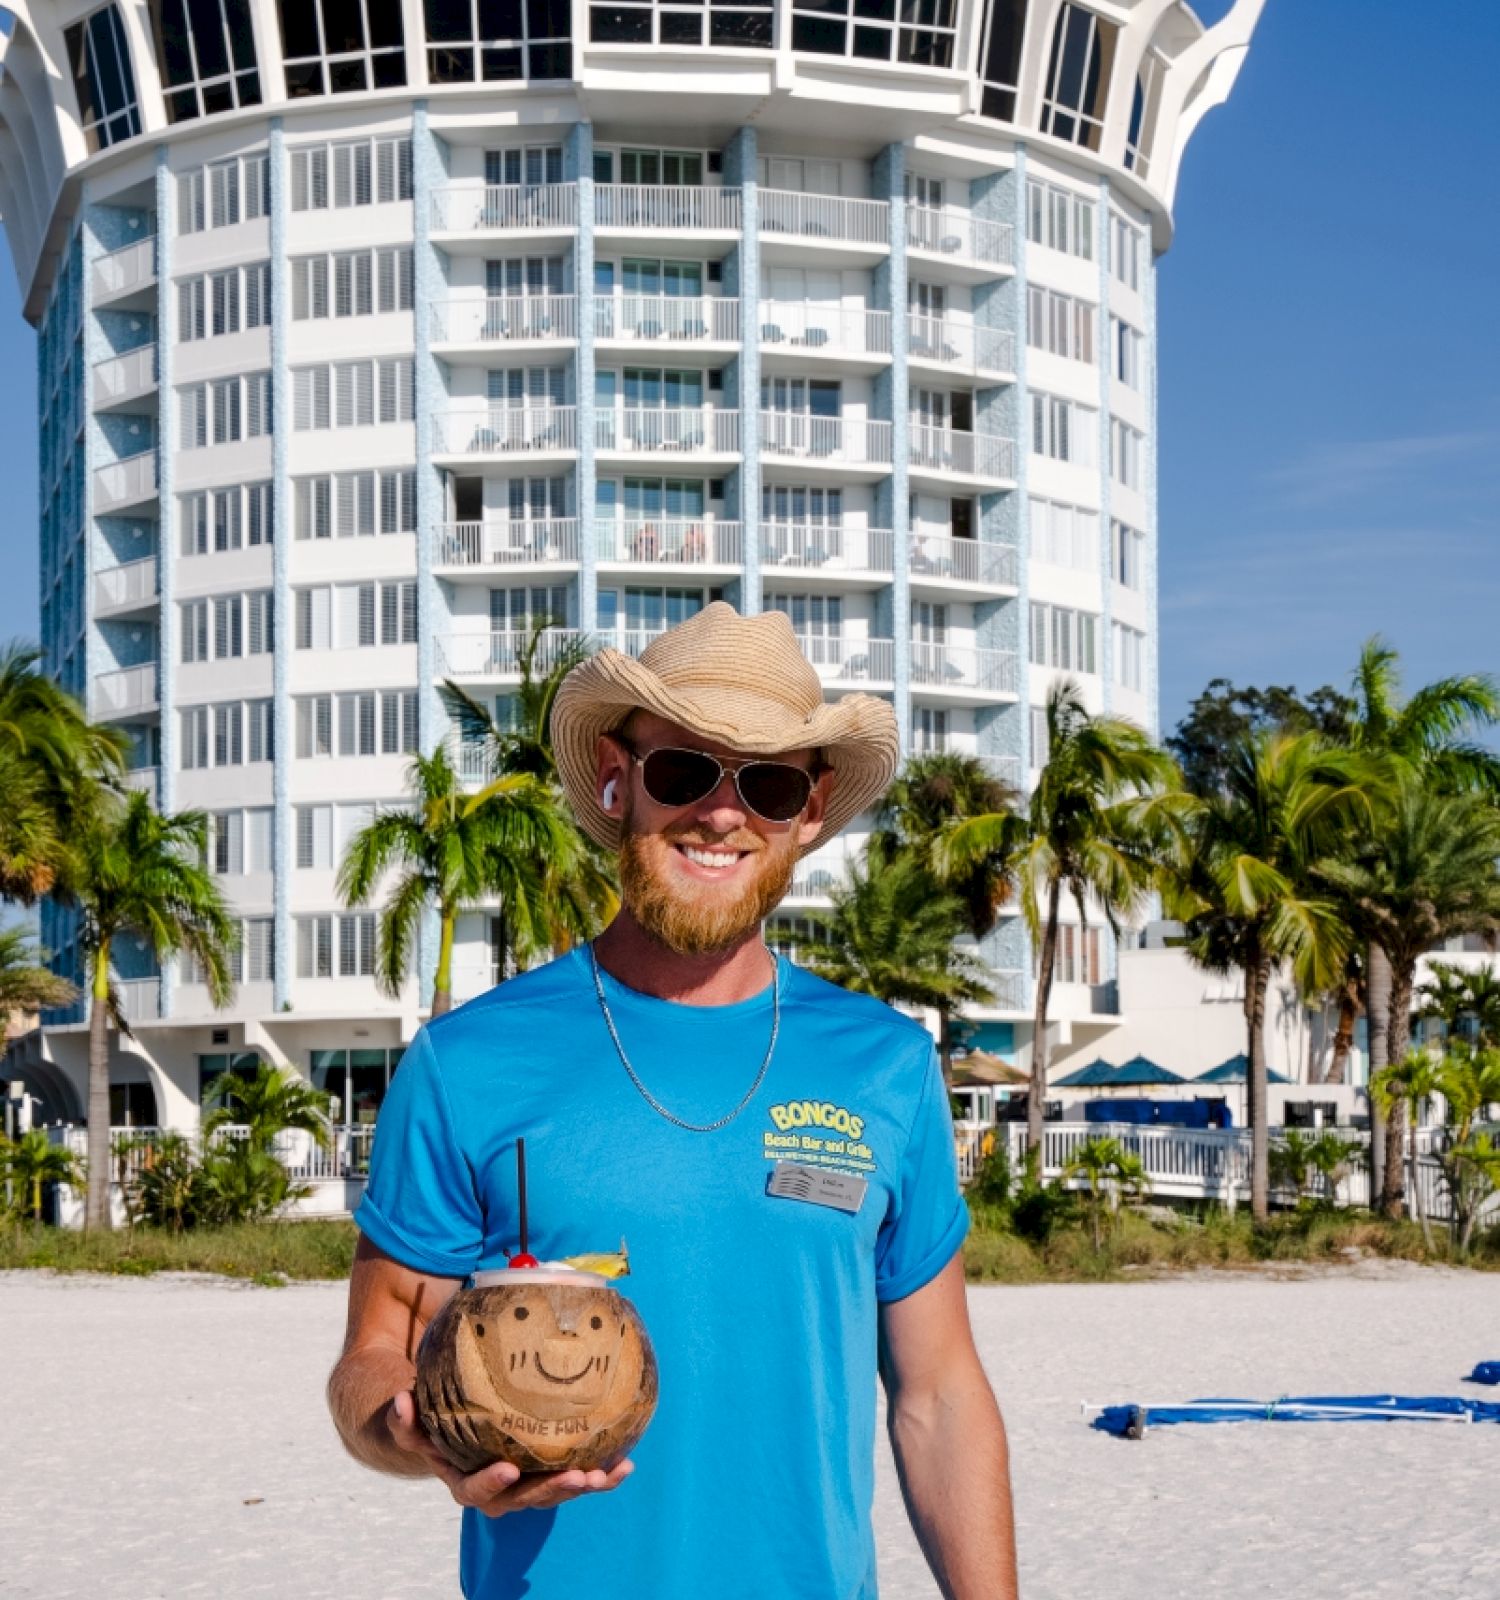 A man in a hat smiles on the beach, holding a coconut, with a hotel in the background.